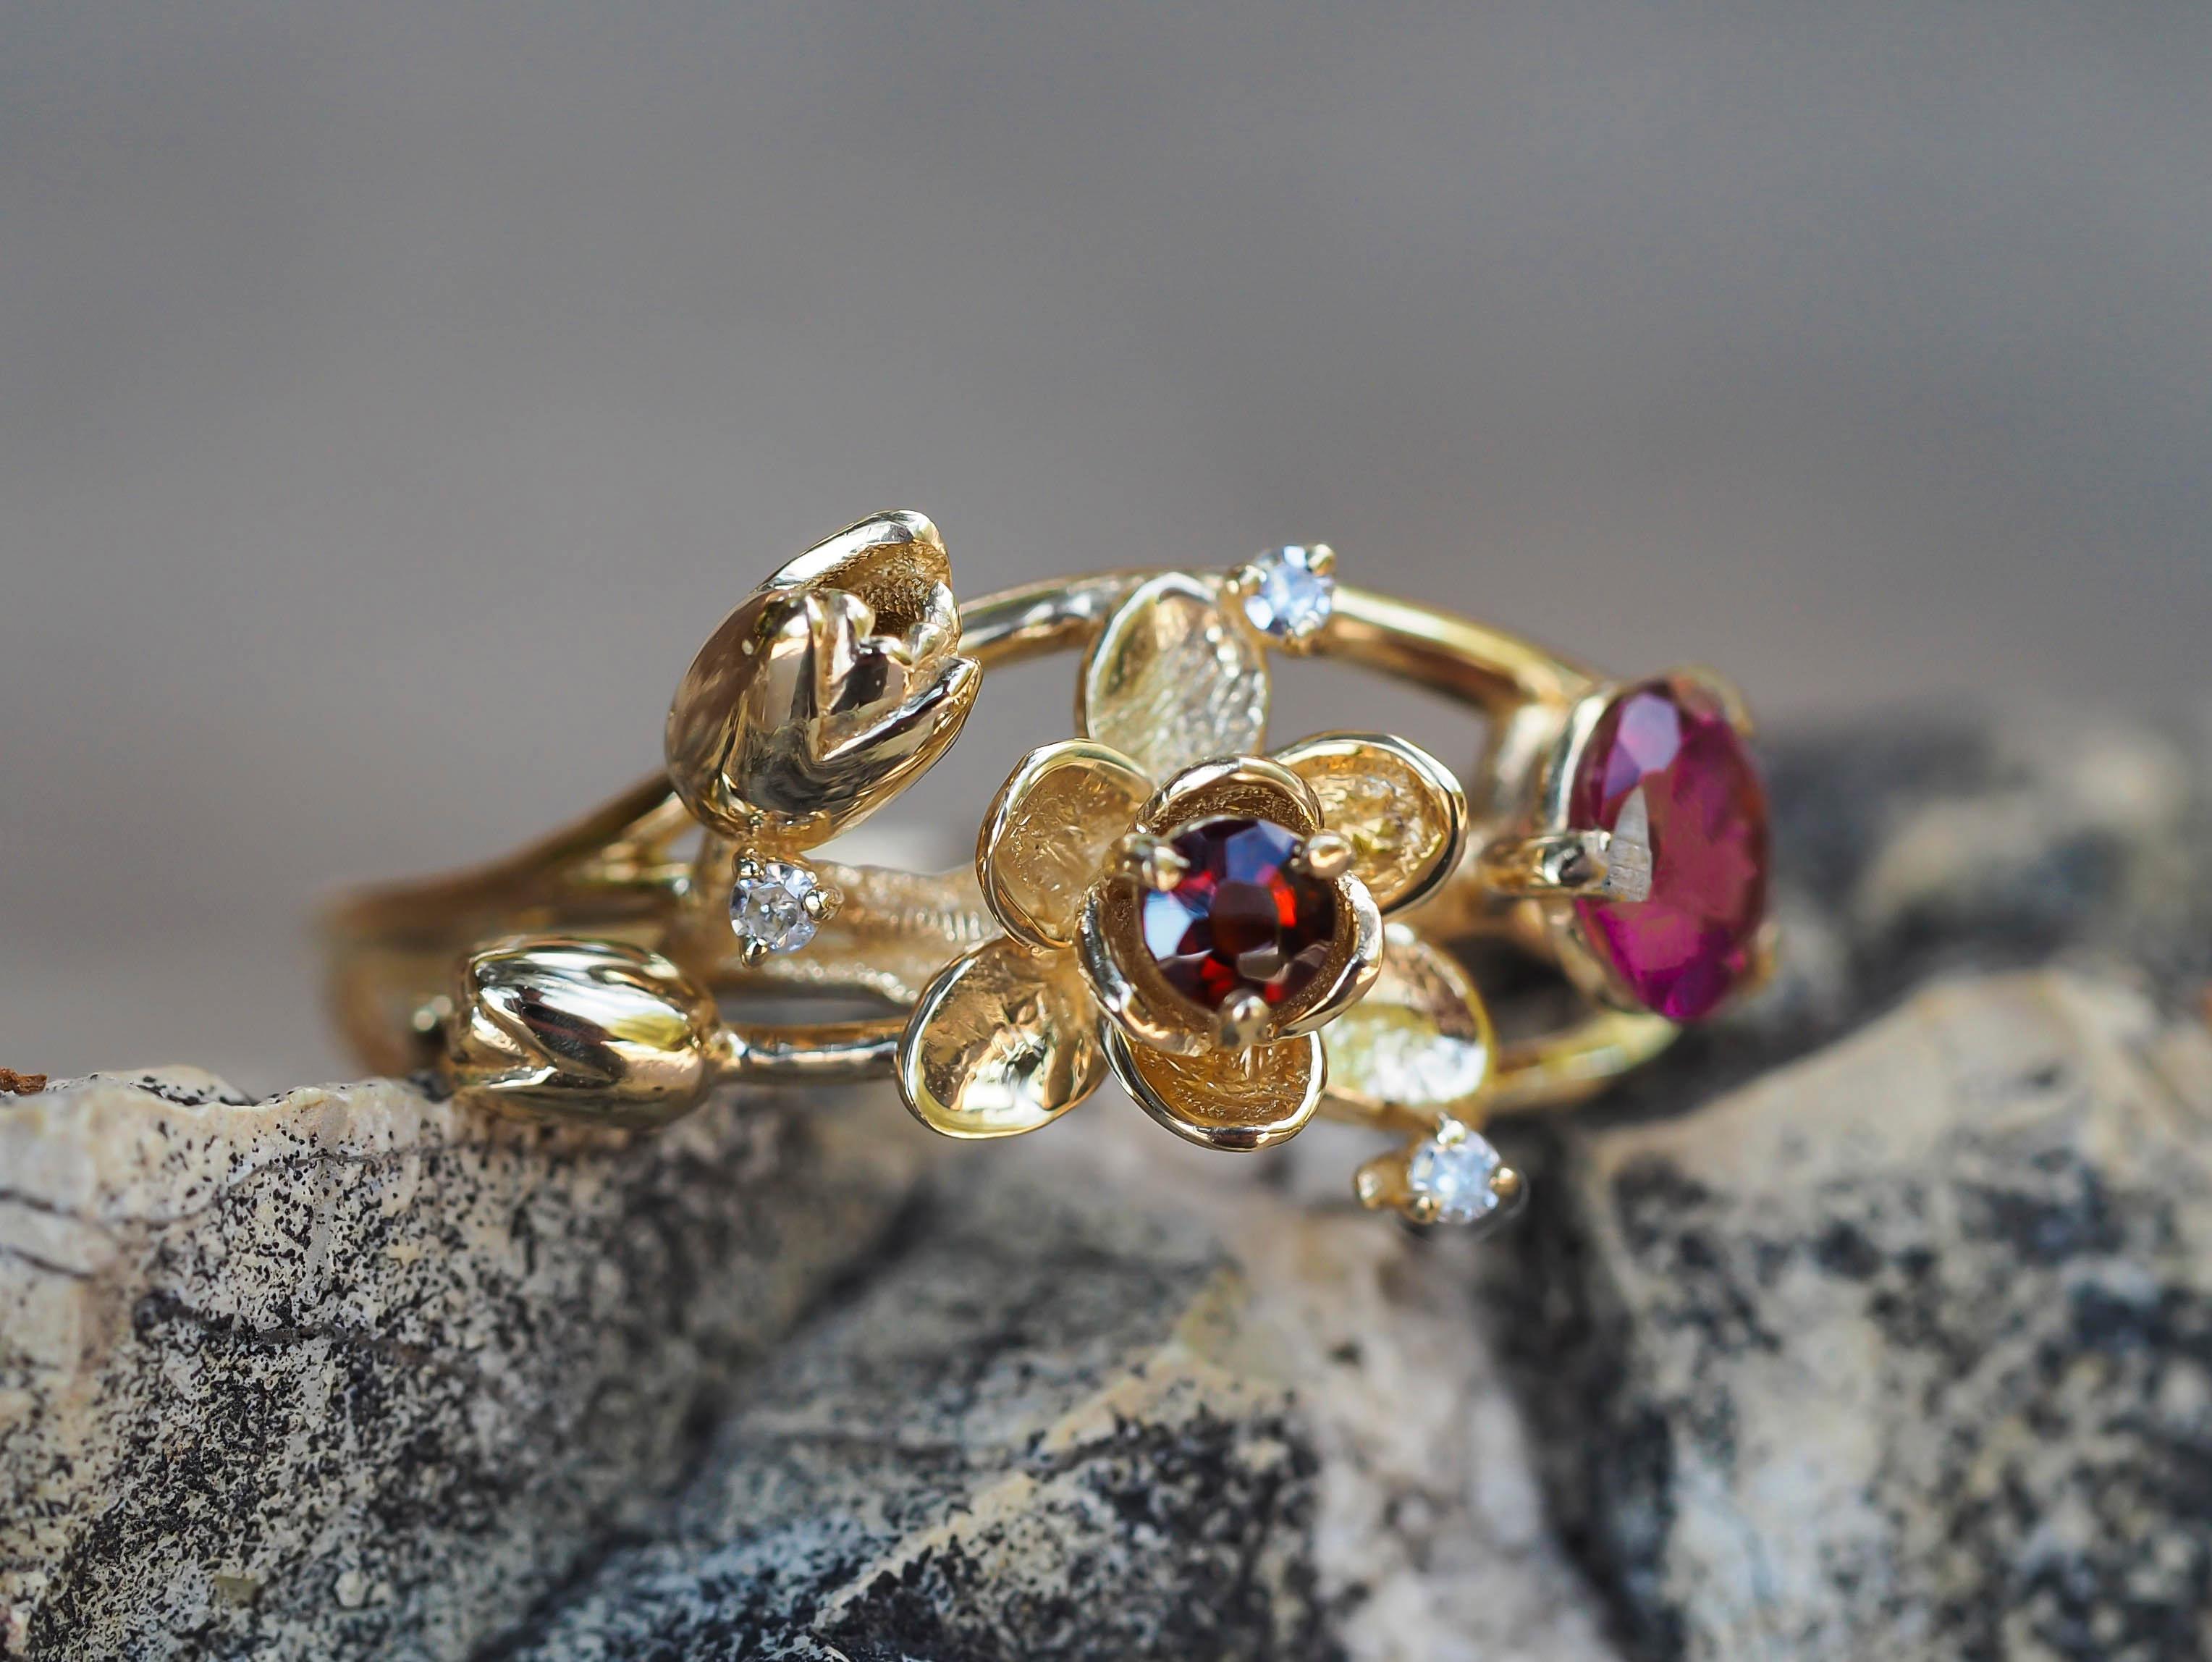 For Sale:  Ruby ring. 14k Gold Ring with Ruby, Garnet and Diamonds. Orchid Flower Ring. 9